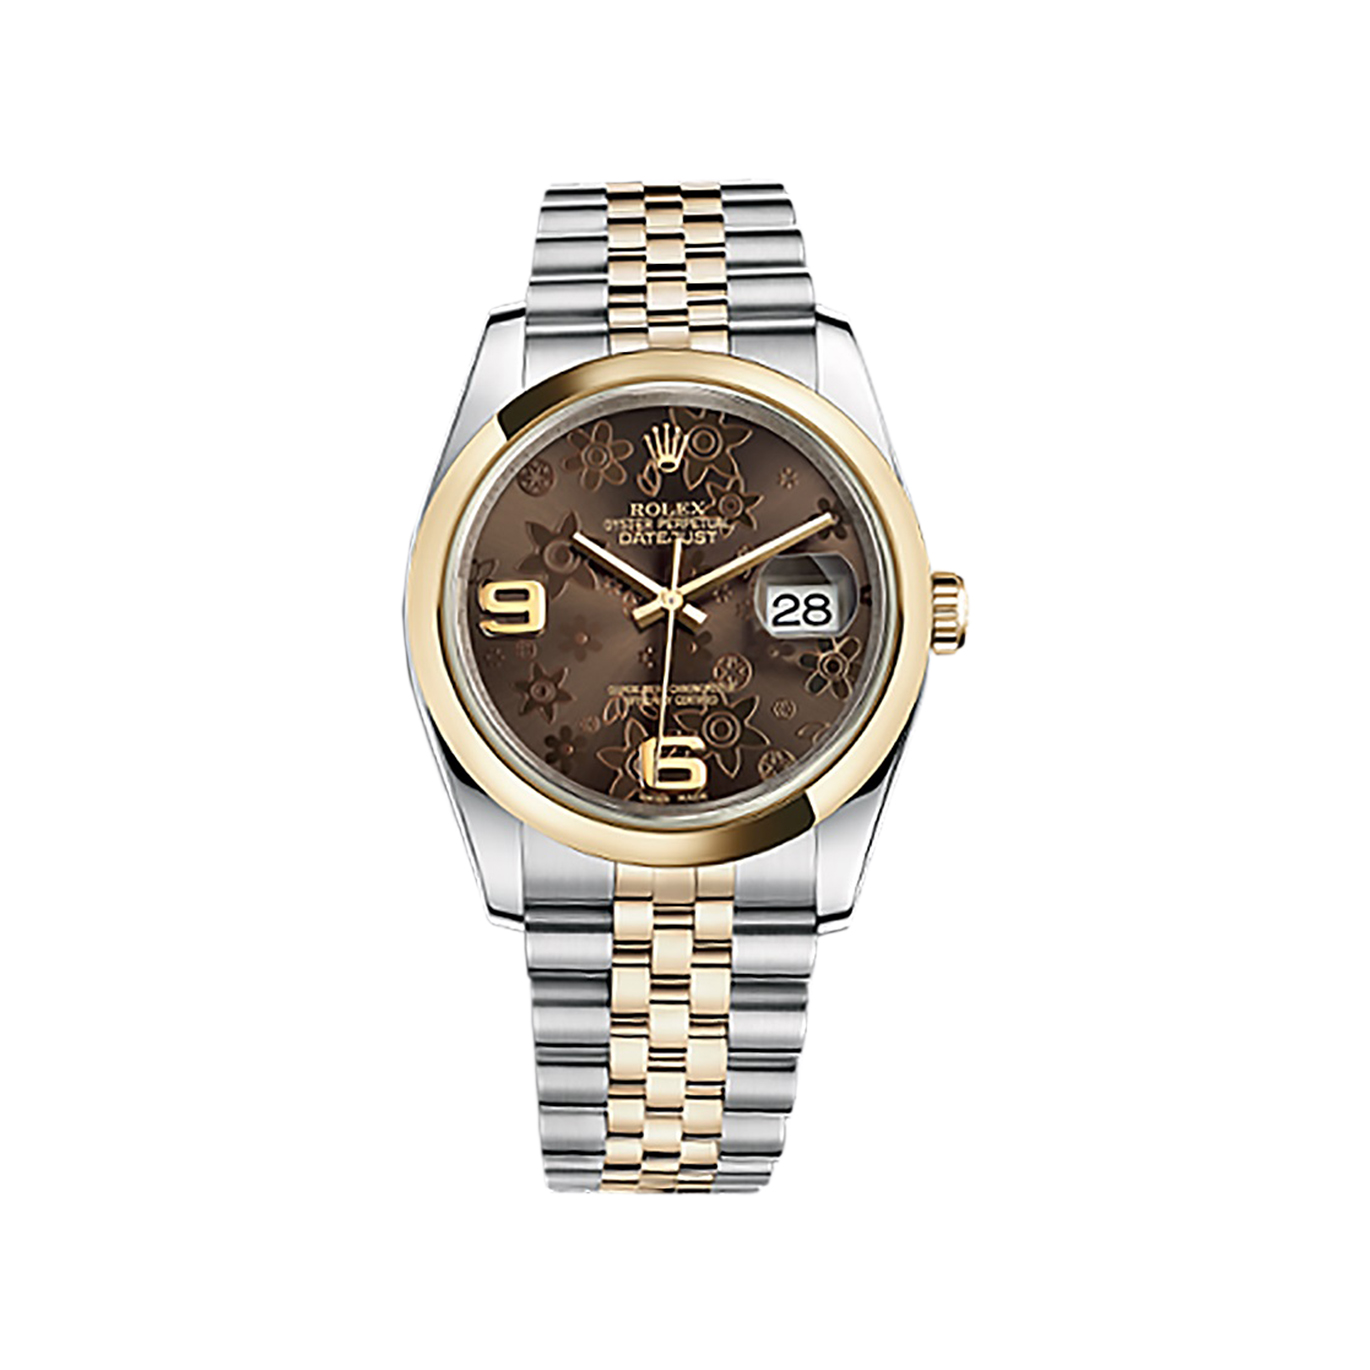 Datejust 36 116203 Gold & Stainless Steel Watch (Bronze Floral Motif) - Click Image to Close